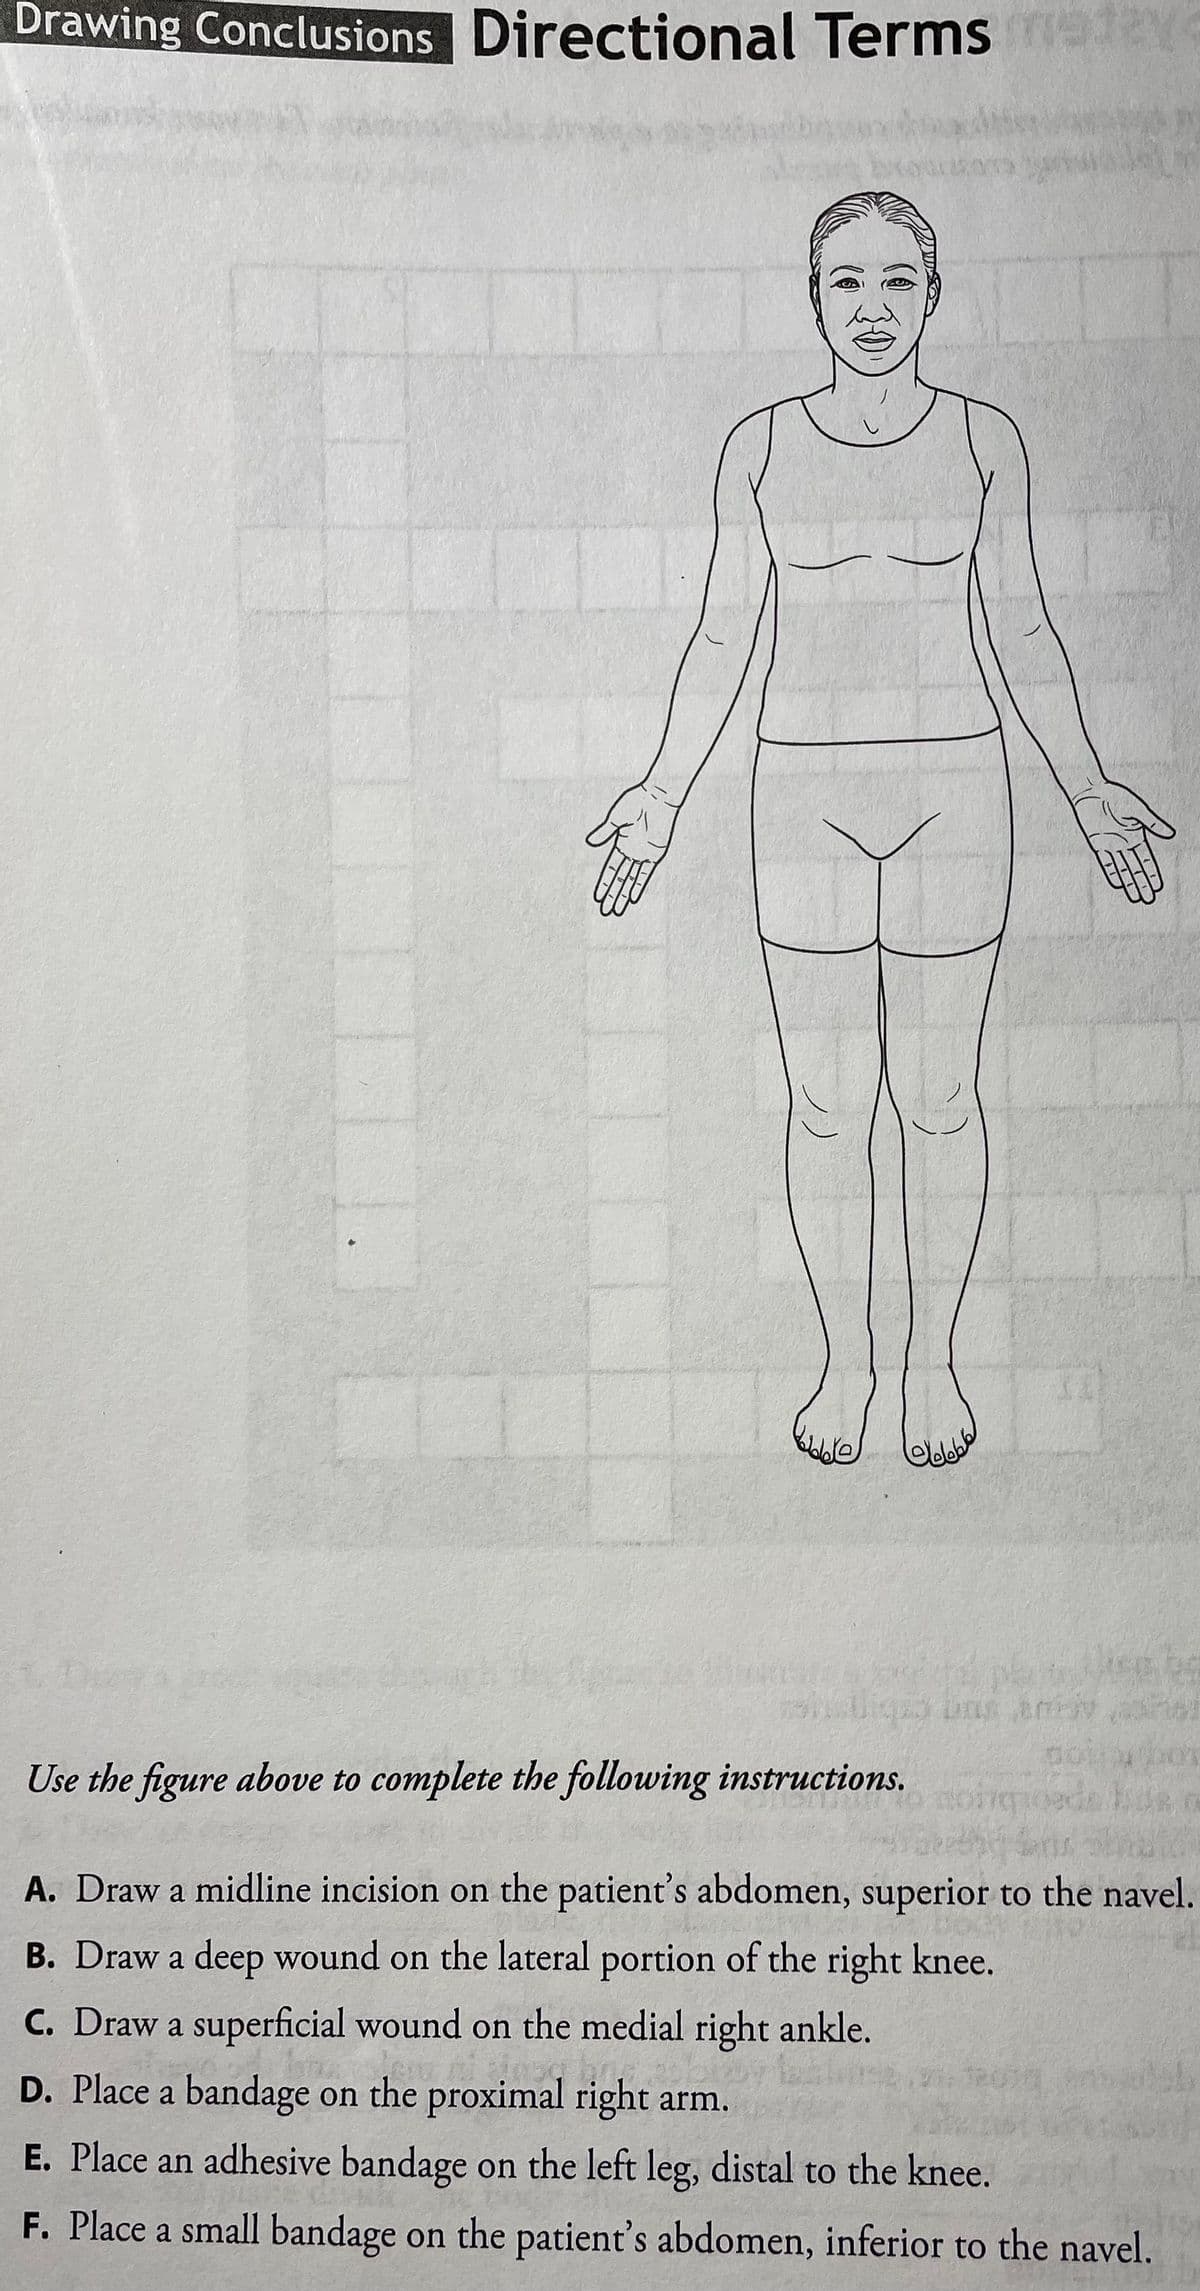 Drawing Conclusions Directional Terms e1ey
ACTU SUO Cs
Use the figure above to complete the following instructions.
A. Draw a midline incision on the patient's abdomen, superior to the navel.
B. Draw a deep wound on the lateral portion of the right knee.
C. Draw a superficial wound on the medial right ankle.
D. Place a bandage on the proximal right arm.
E. Place an adhesive bandage on the left leg, distal to the knee.
F. Place a small bandage on the patient's abdomen, inferior to the navel.
